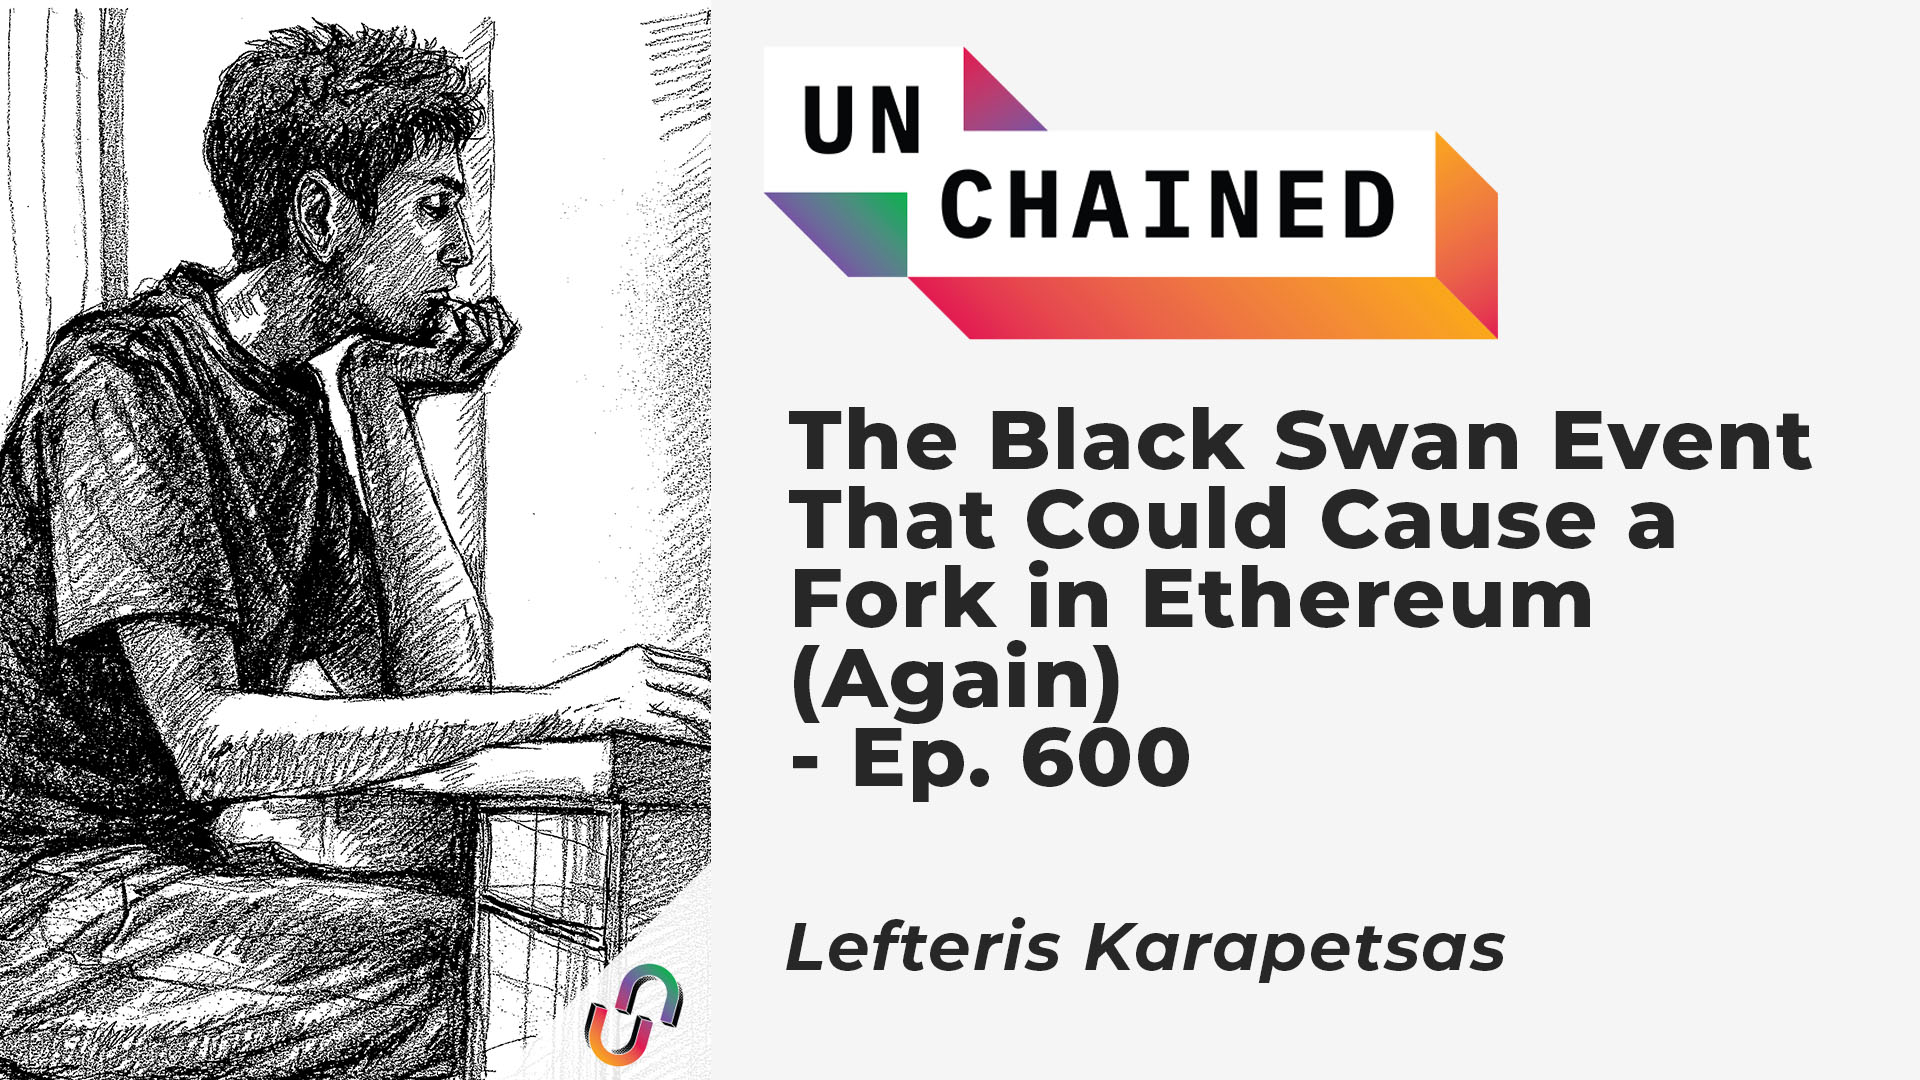 The Black Swan Event That Could Cause a Fork in Ethereum (Again) - Ep. 600